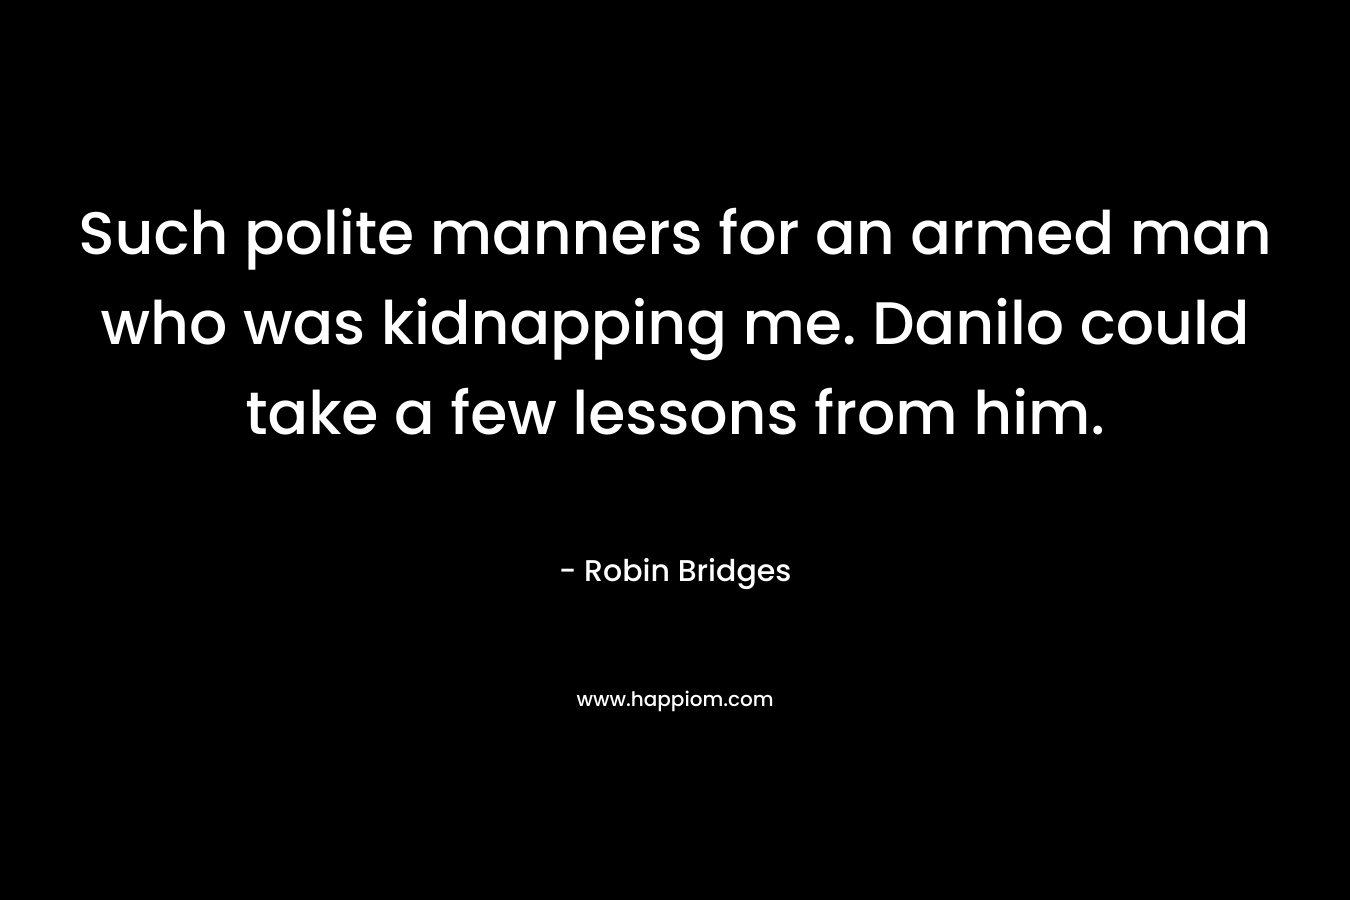 Such polite manners for an armed man who was kidnapping me. Danilo could take a few lessons from him.